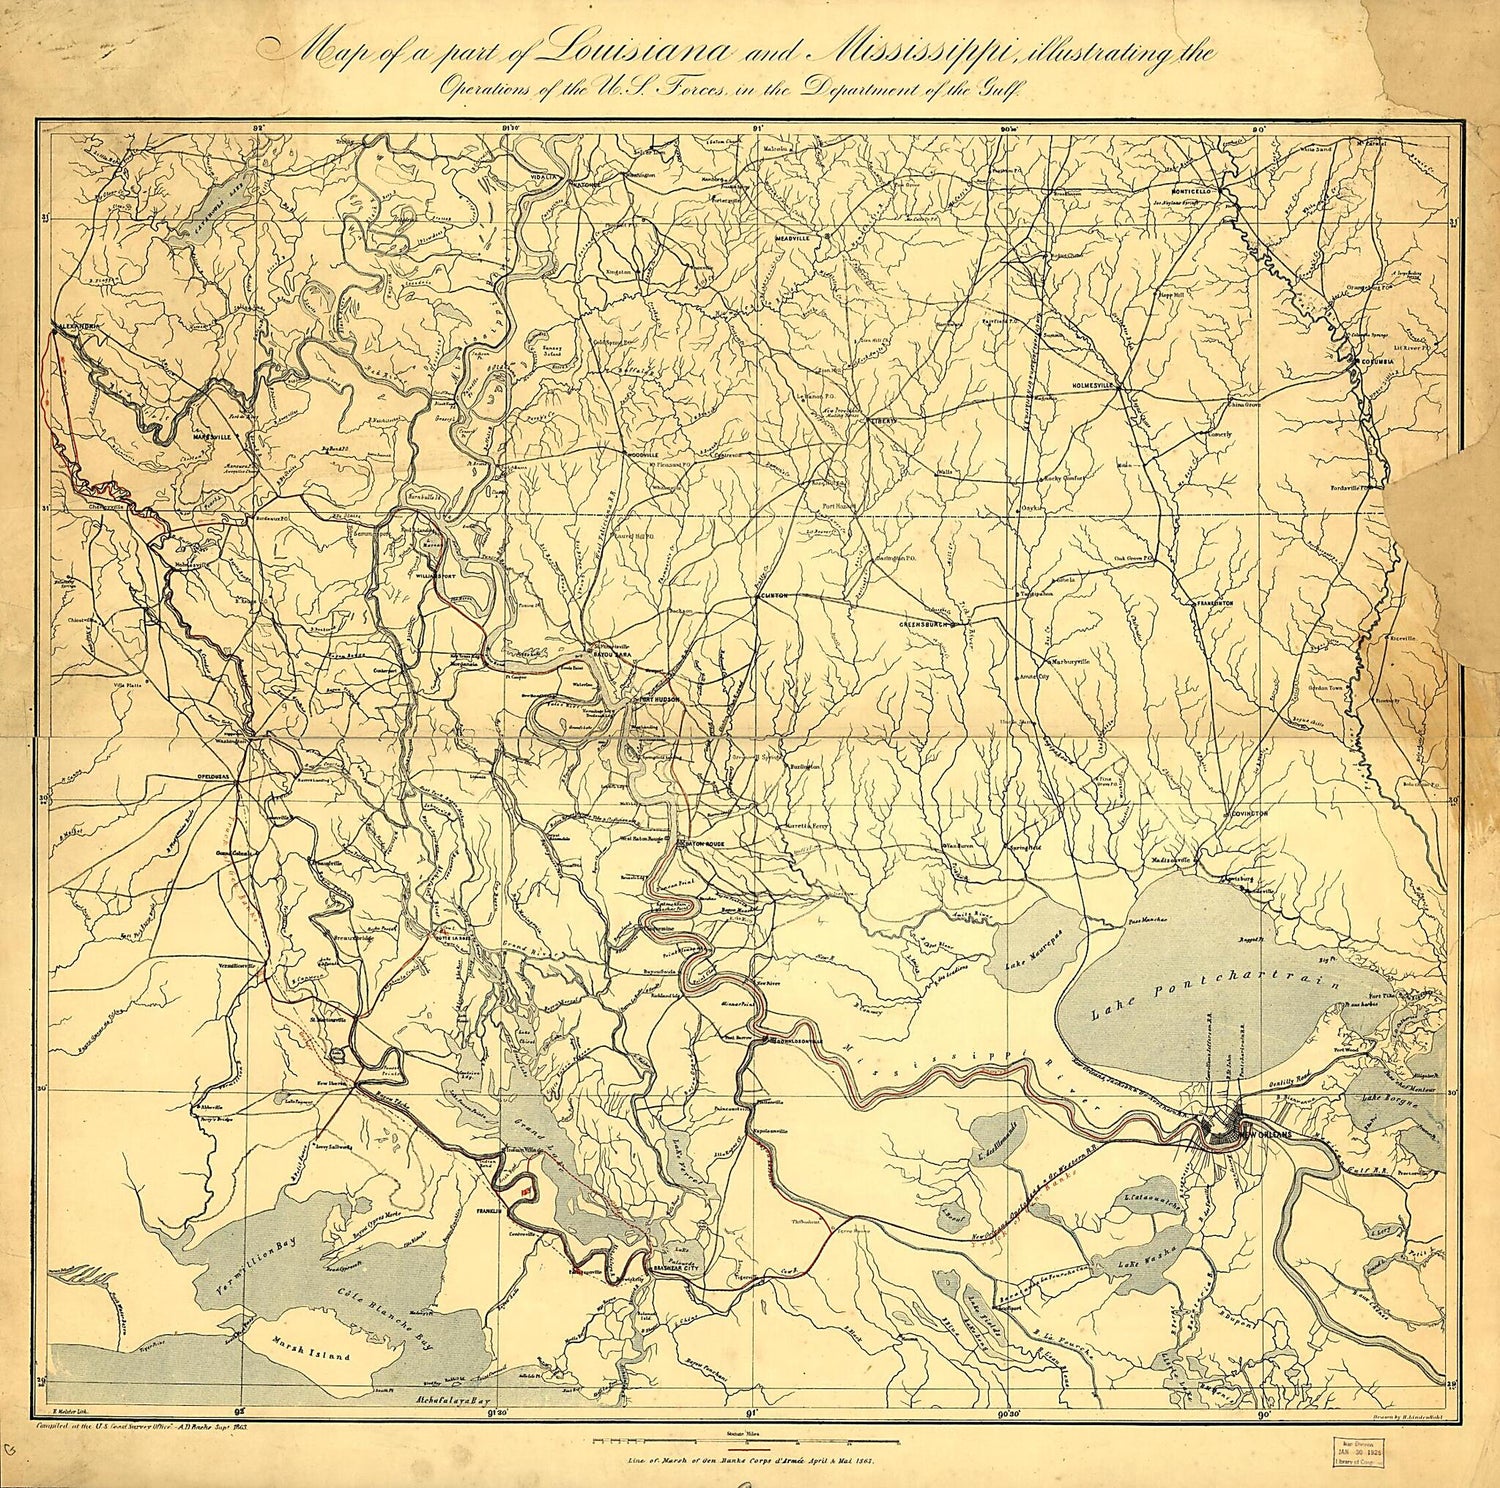 This old map of Map of a Part of Louisiana and Mississippi, Illustrating the Operations of the U.S. Forces, In the Department of the Gulf from 1863 was created by A. D. (Alexander Dallas) Bache, H. (Henry) Lindenkohl,  United States Coast Survey in 1863